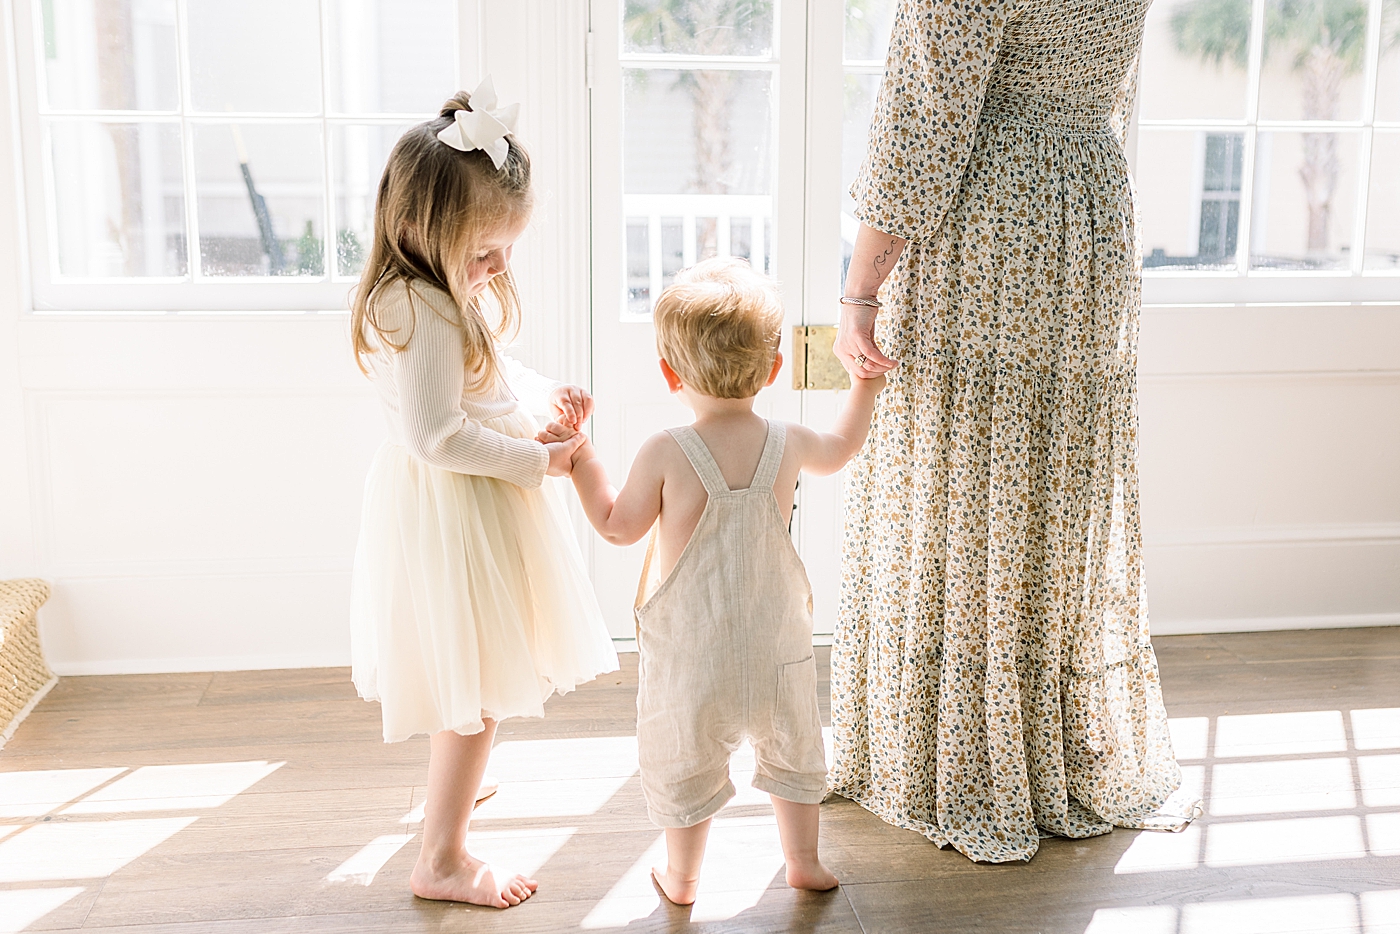 Mother holding hands with her two children next to a window with sun streaming in | Image by Caitlyn Motycka 